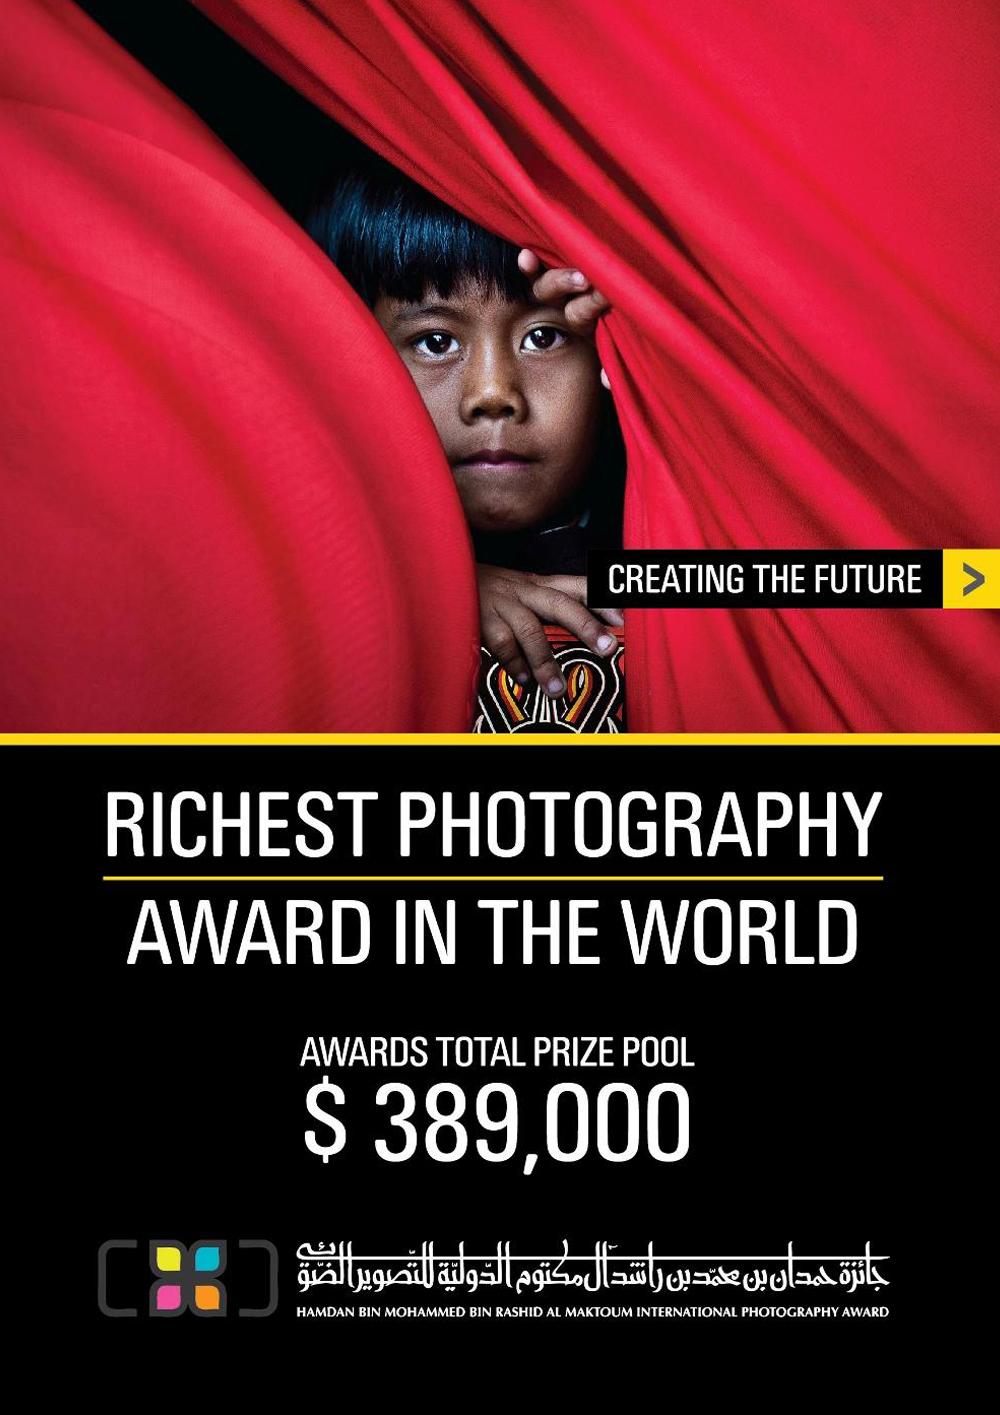 IIP ATTRACTS INTERNATIONAL ATTENTION, ENTERS INTO AN EXCLUSIVE COLLABORATION WITH HIPA, WORLD’S RICHEST PHOTOGRAPHY AWARD